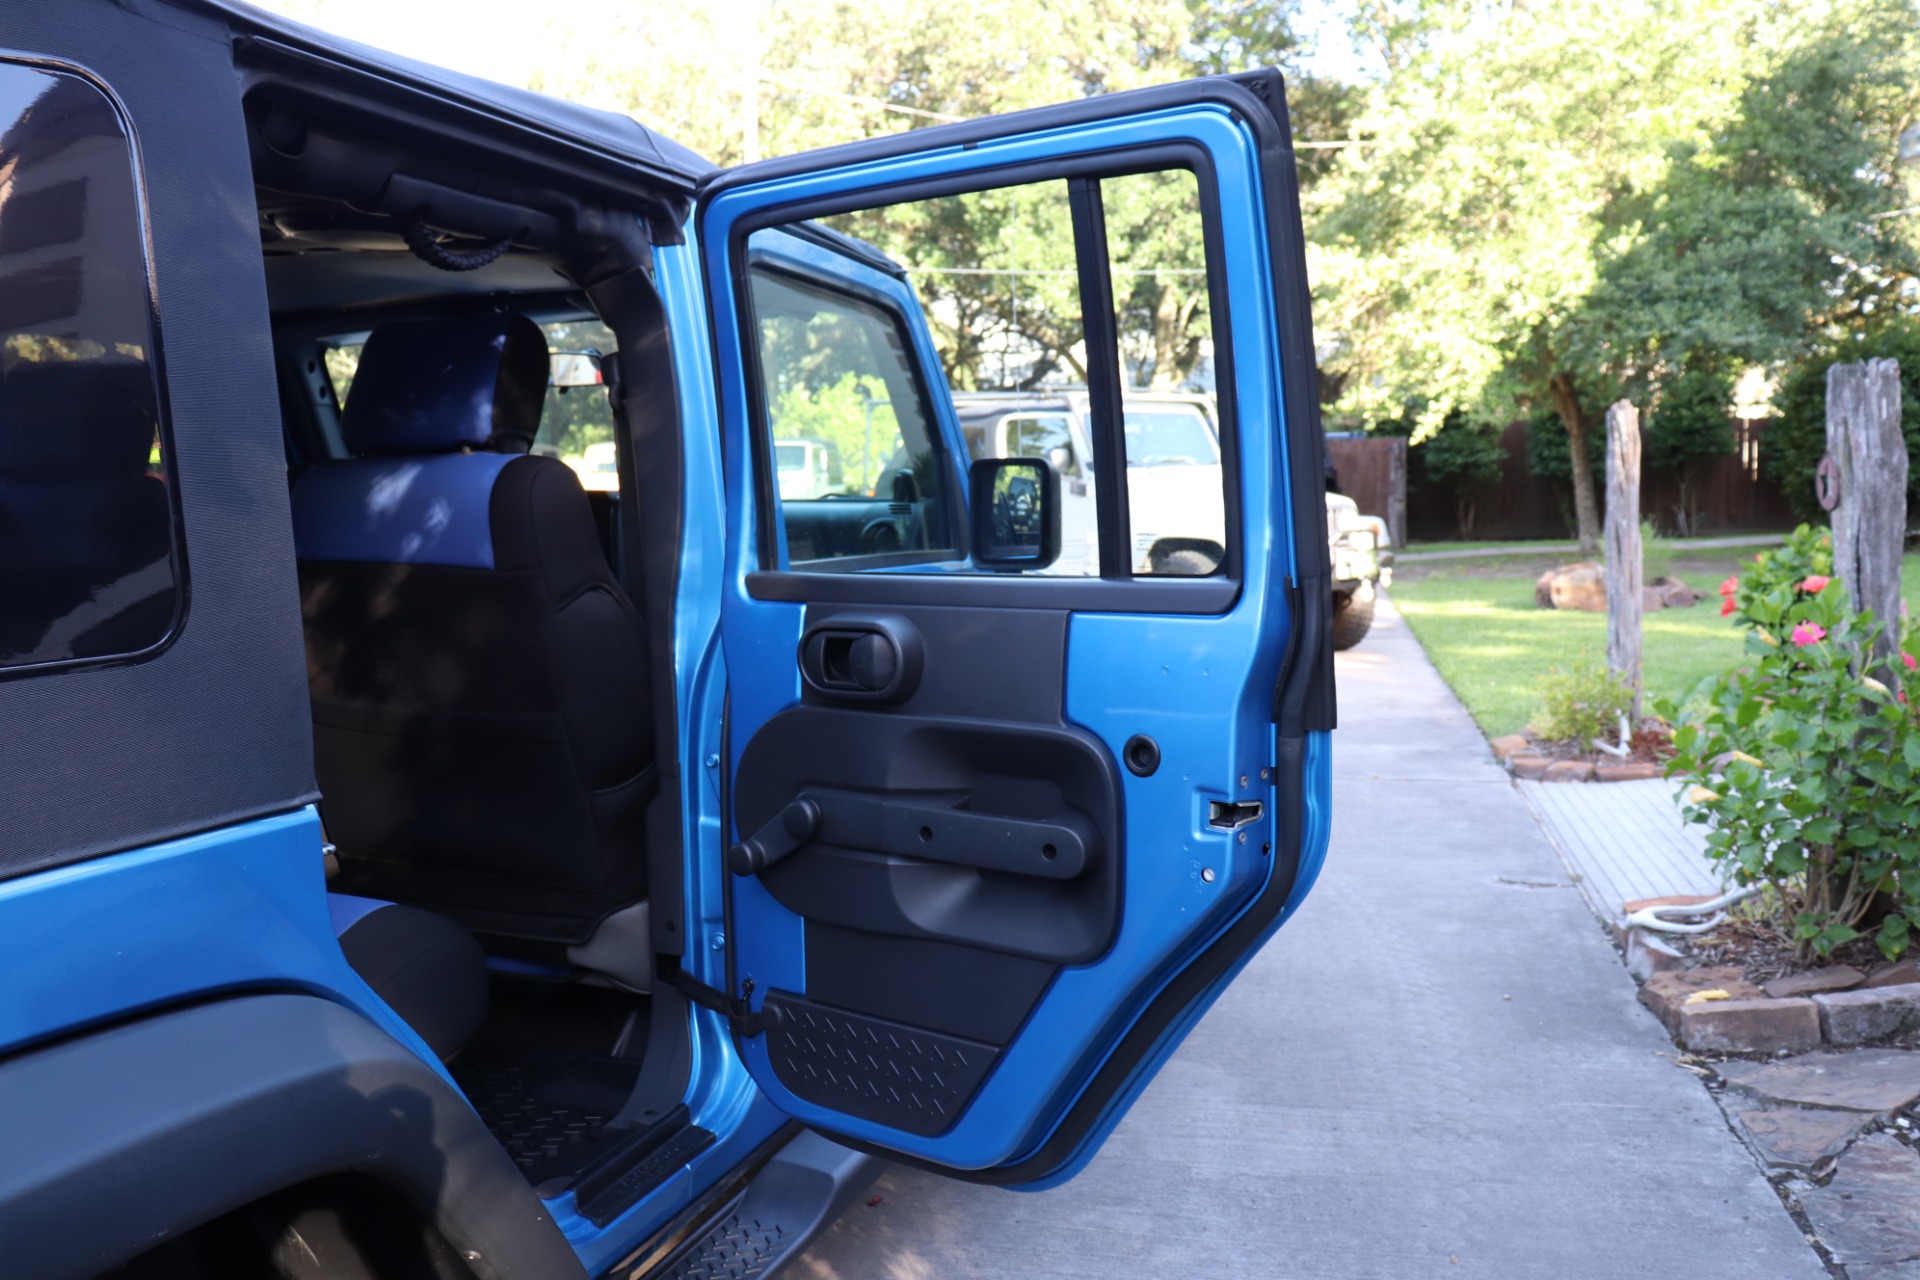 Used-2010-Jeep-Wrangler-Unlimited-4WD-4dr-Sport